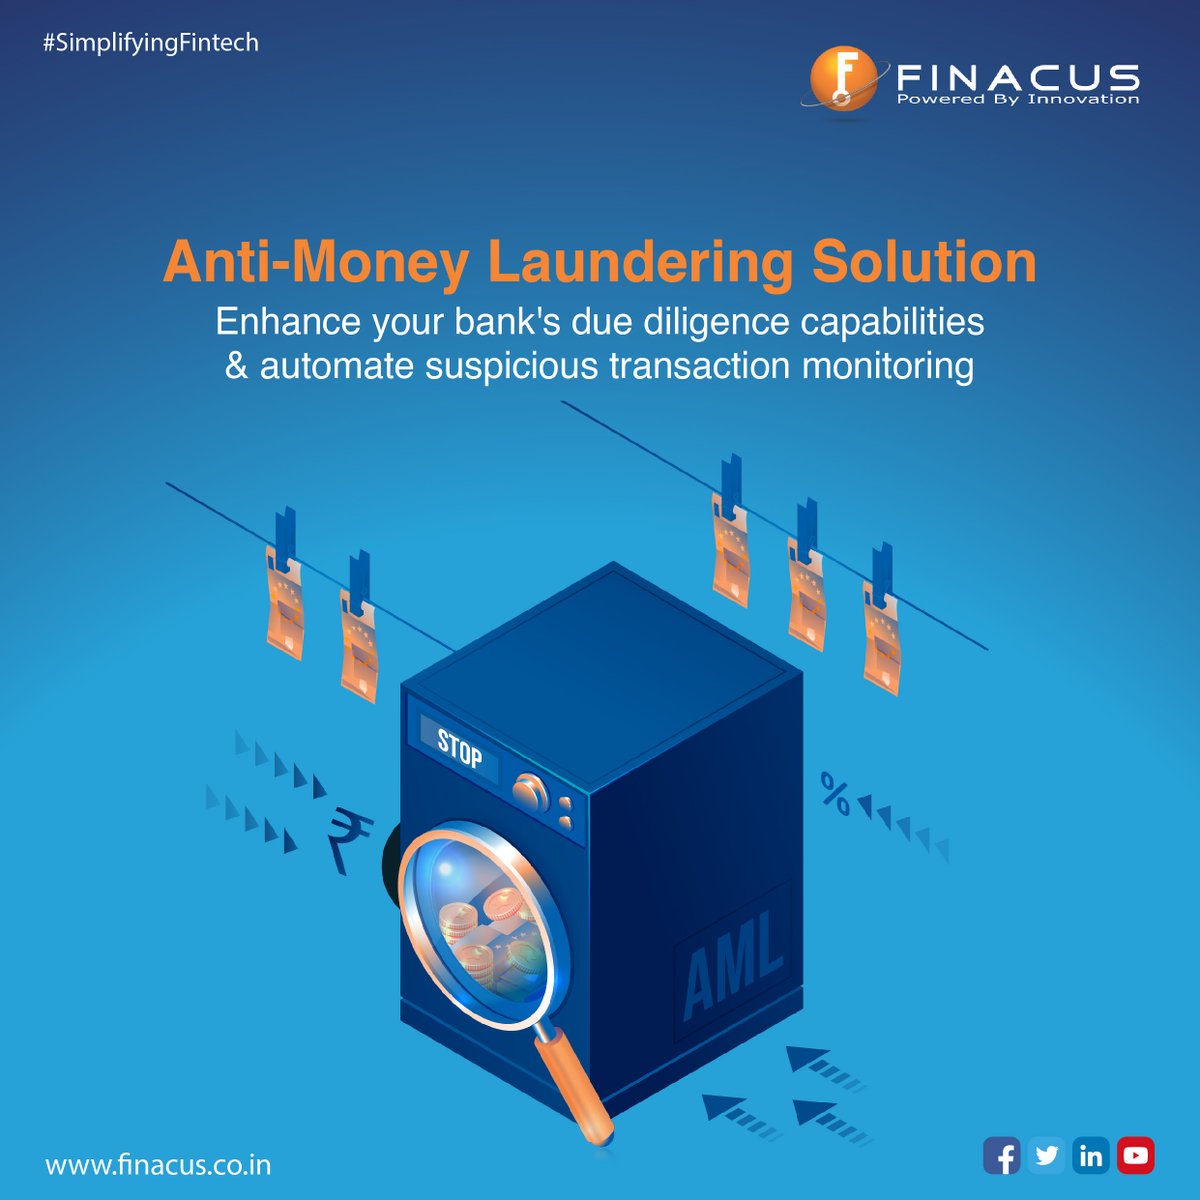 @FinacusTech  FinAMLOR solution helps #Banks to monitor transactions, intelligent detection tools, watch list filtering, alerts investigation, case management, regulatory reporting (STR), and management reporting🏦

#AntiMoneyLaundering #BankTech #API  #India #Fintech #Finacus